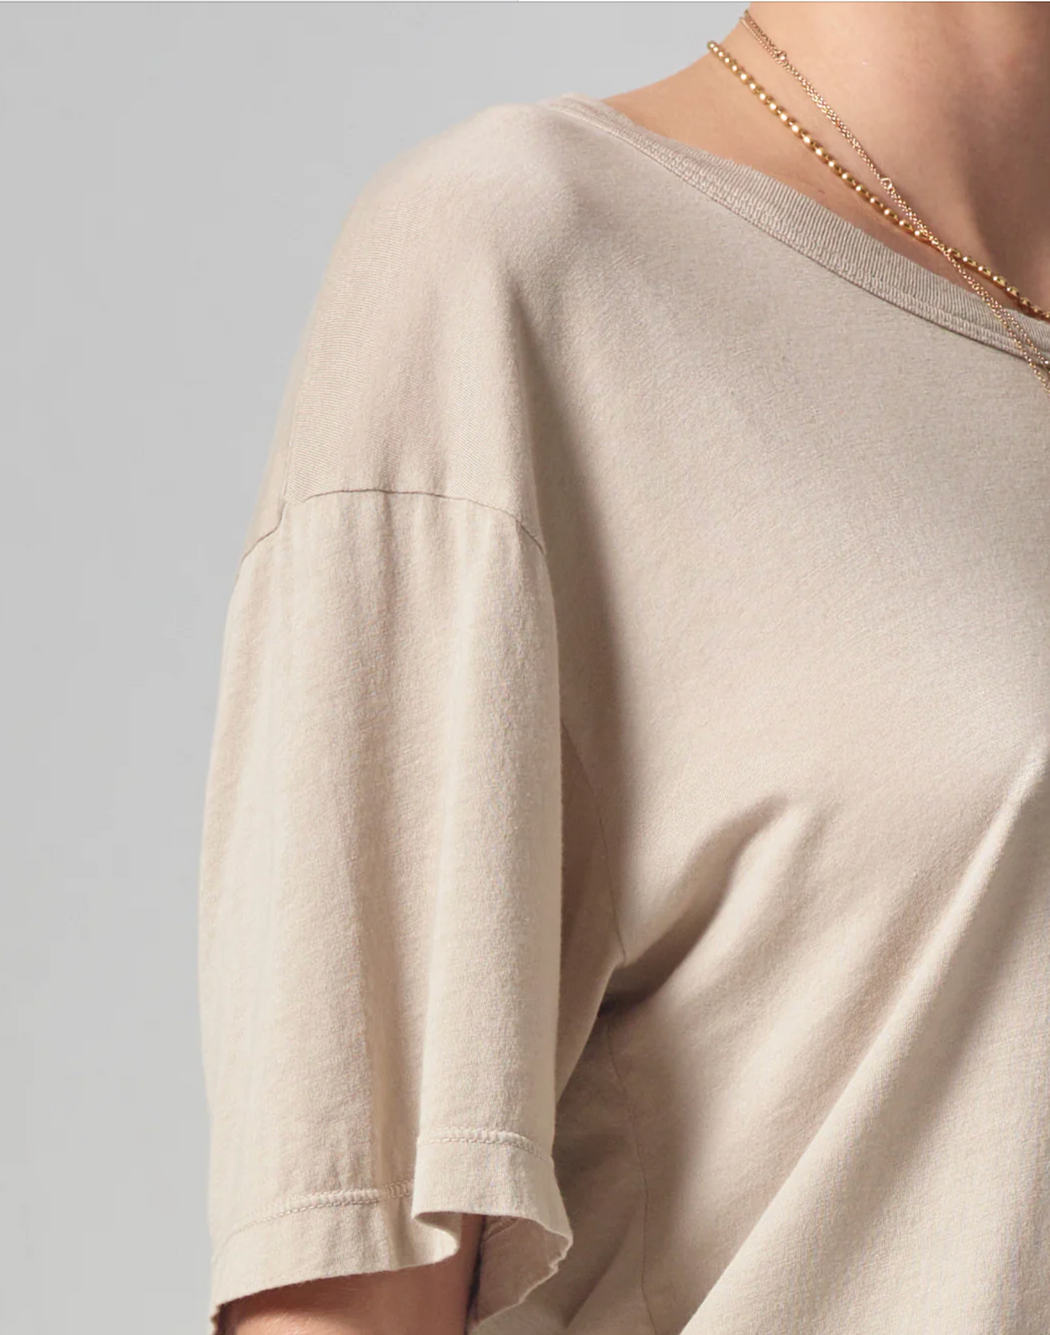 Citizens of Humanity :: Elisabetta Relaxed Tee